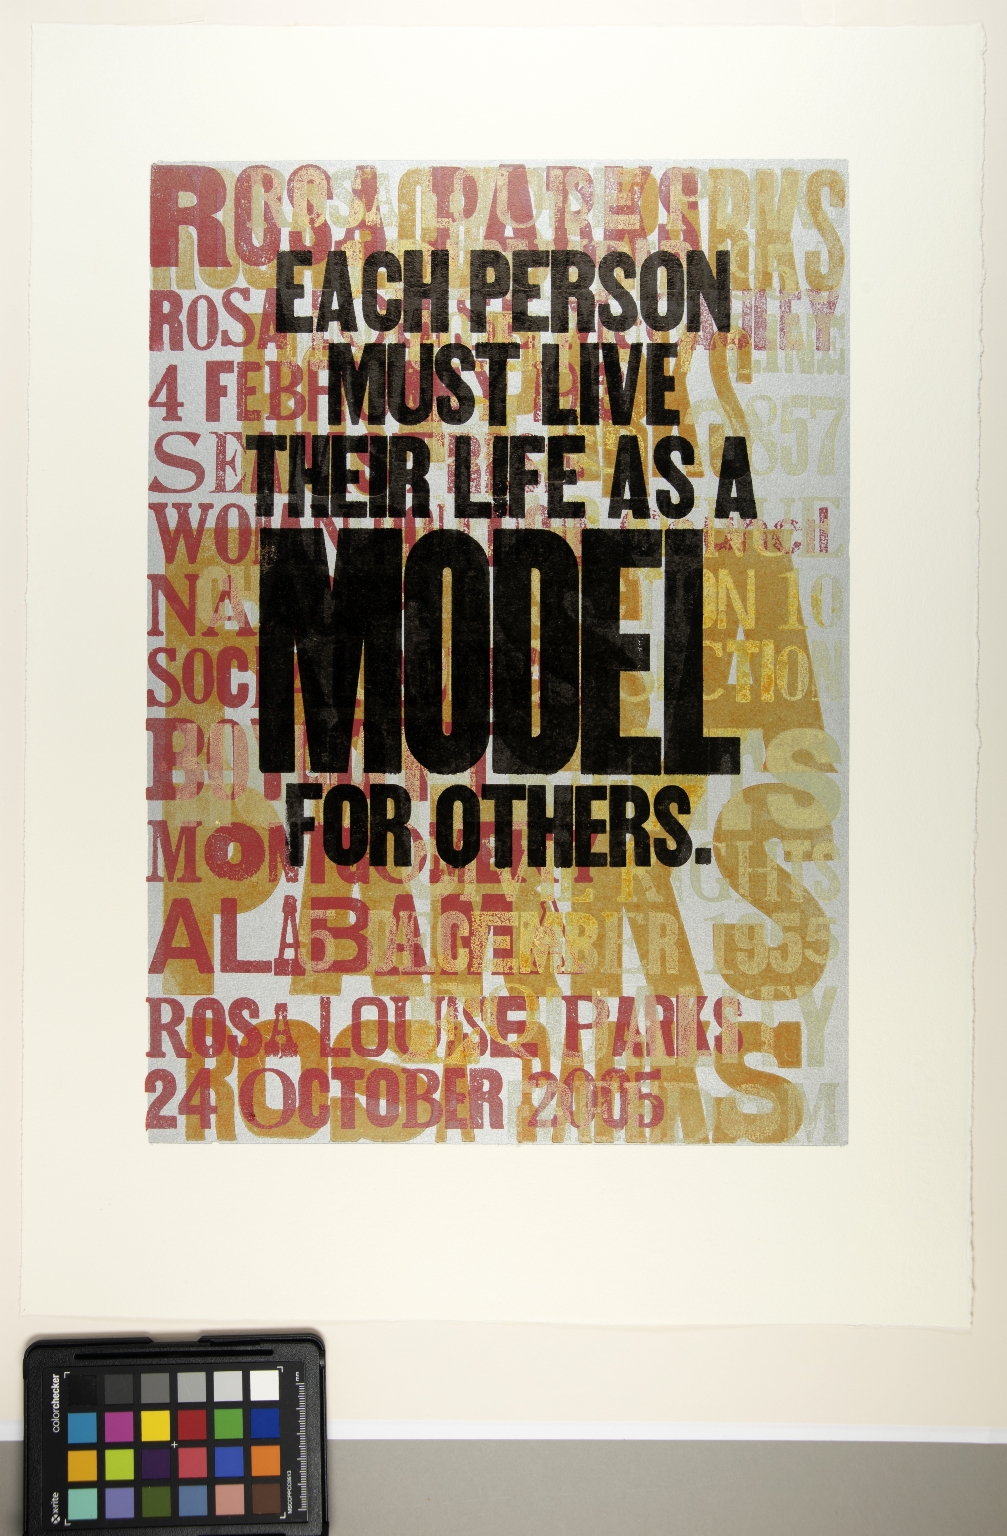 Fourteen Quotes from Rosa Louise Parks, Civil Rights Activist: "Each person must live their life as a model for others."